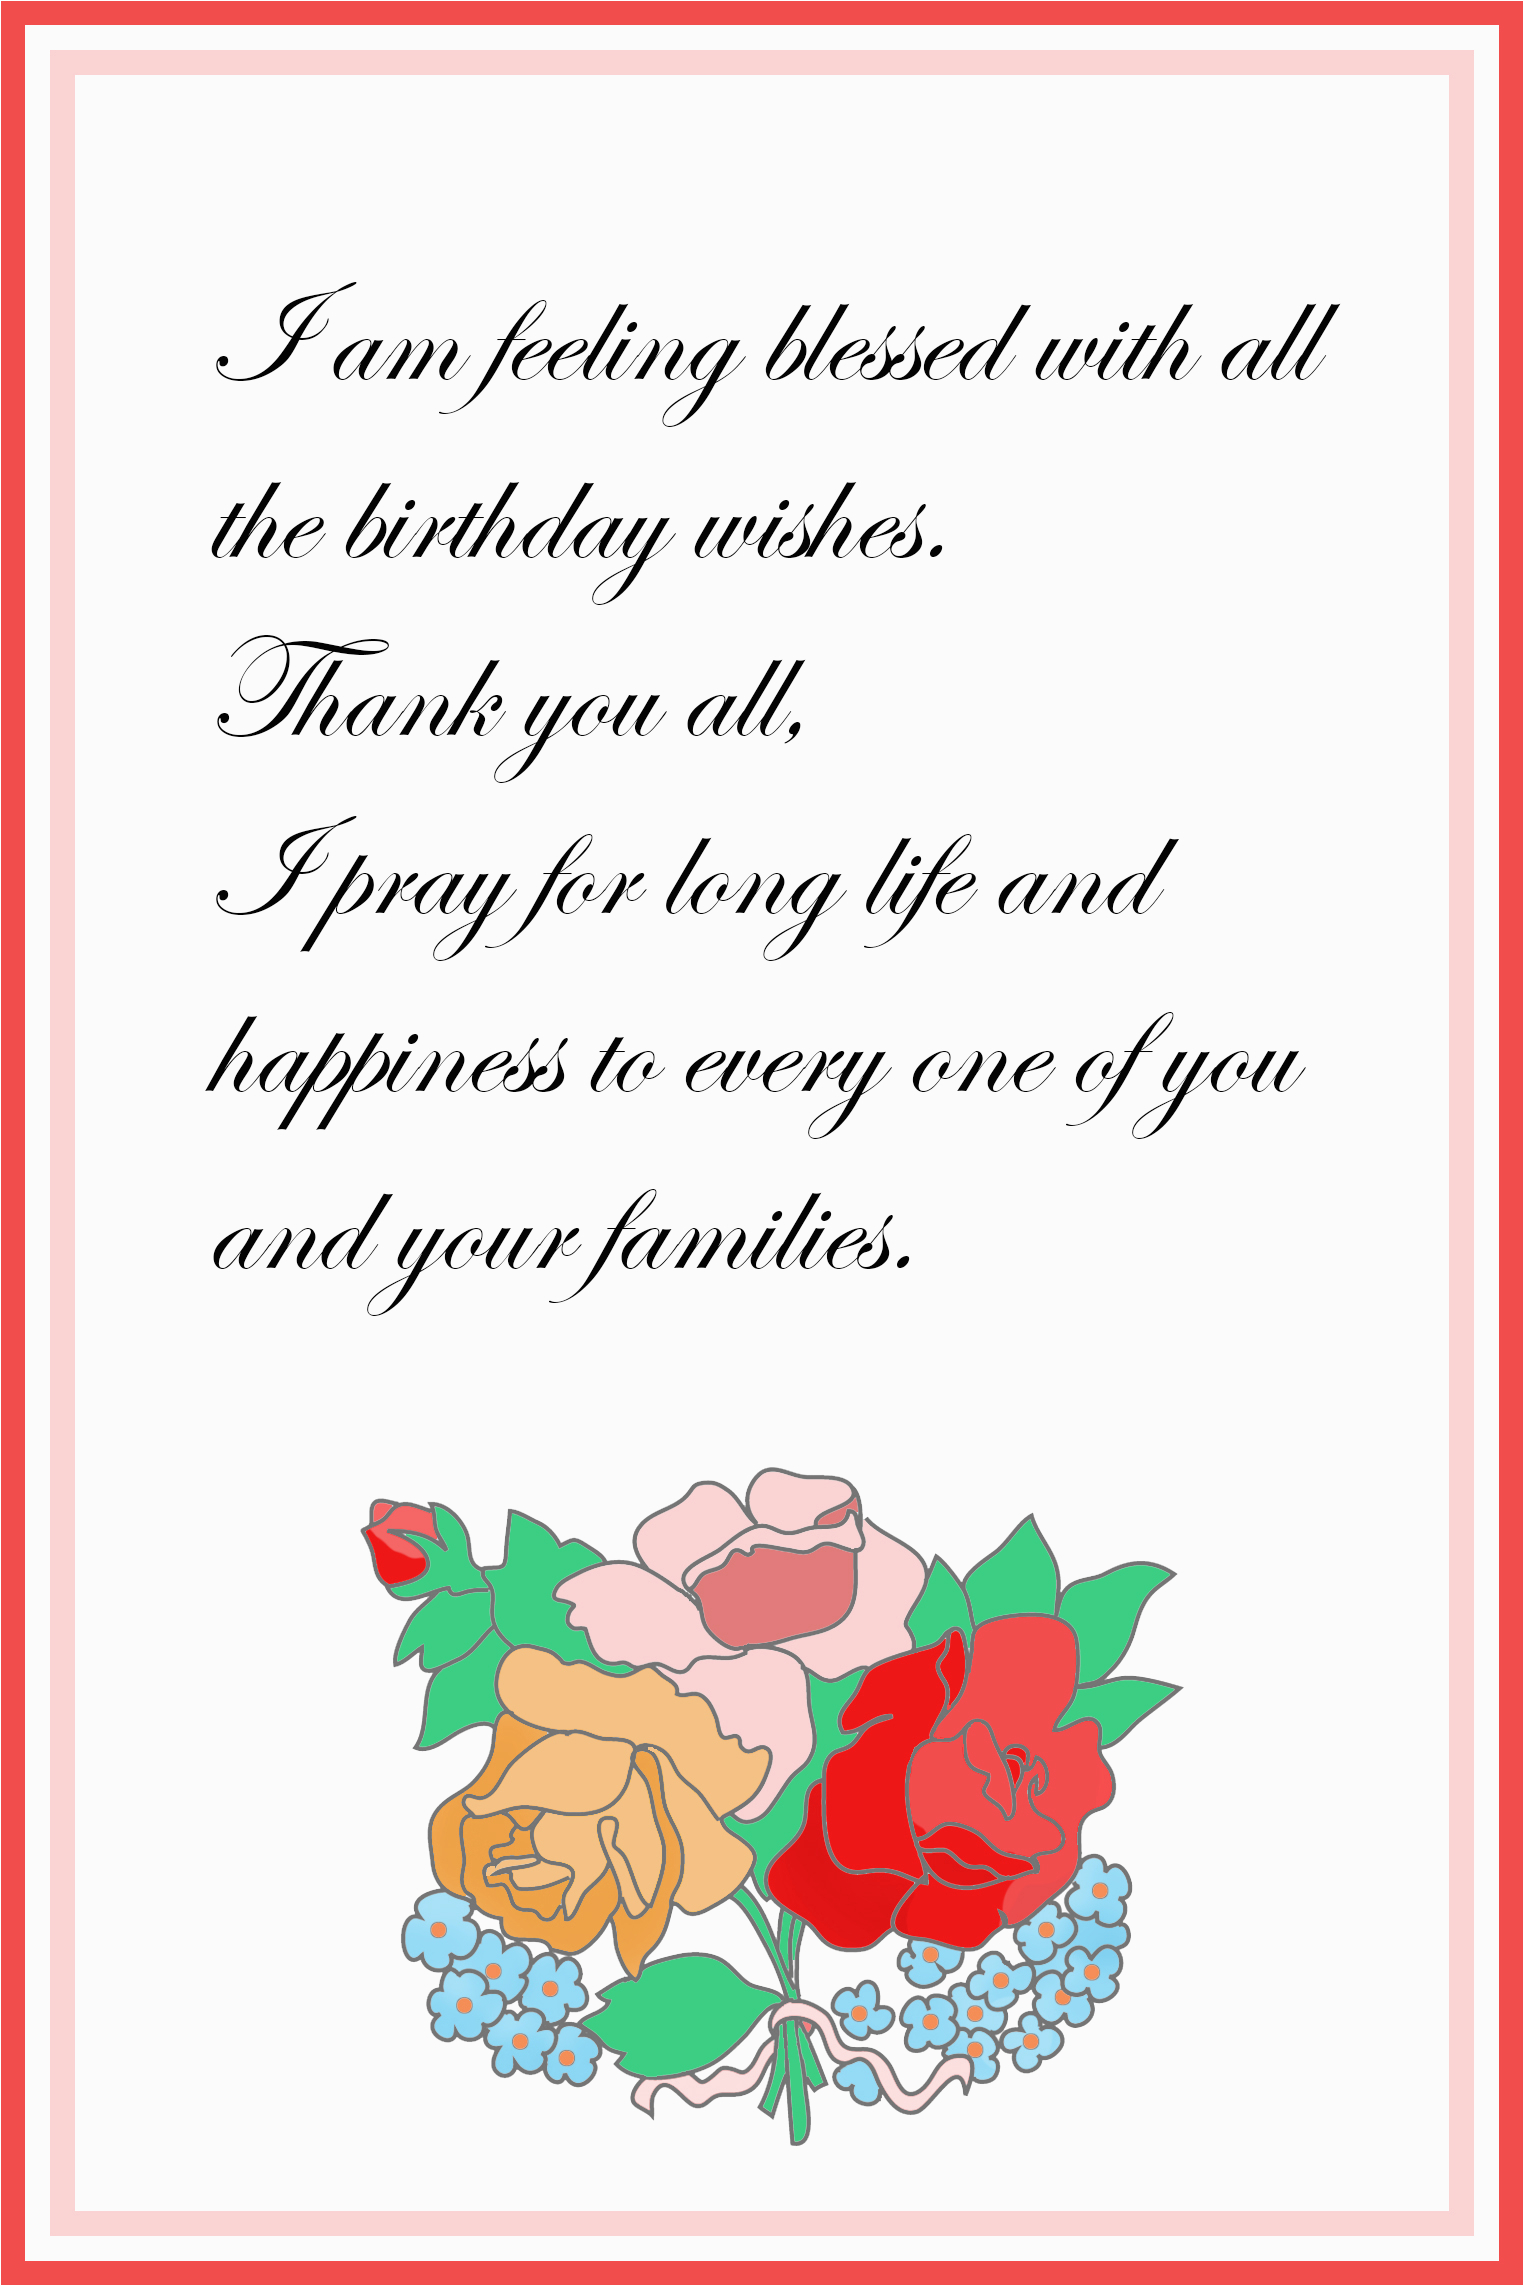 Live Birthday Cards Free Download Best Of Printable Birthday Cards Foldable for Men